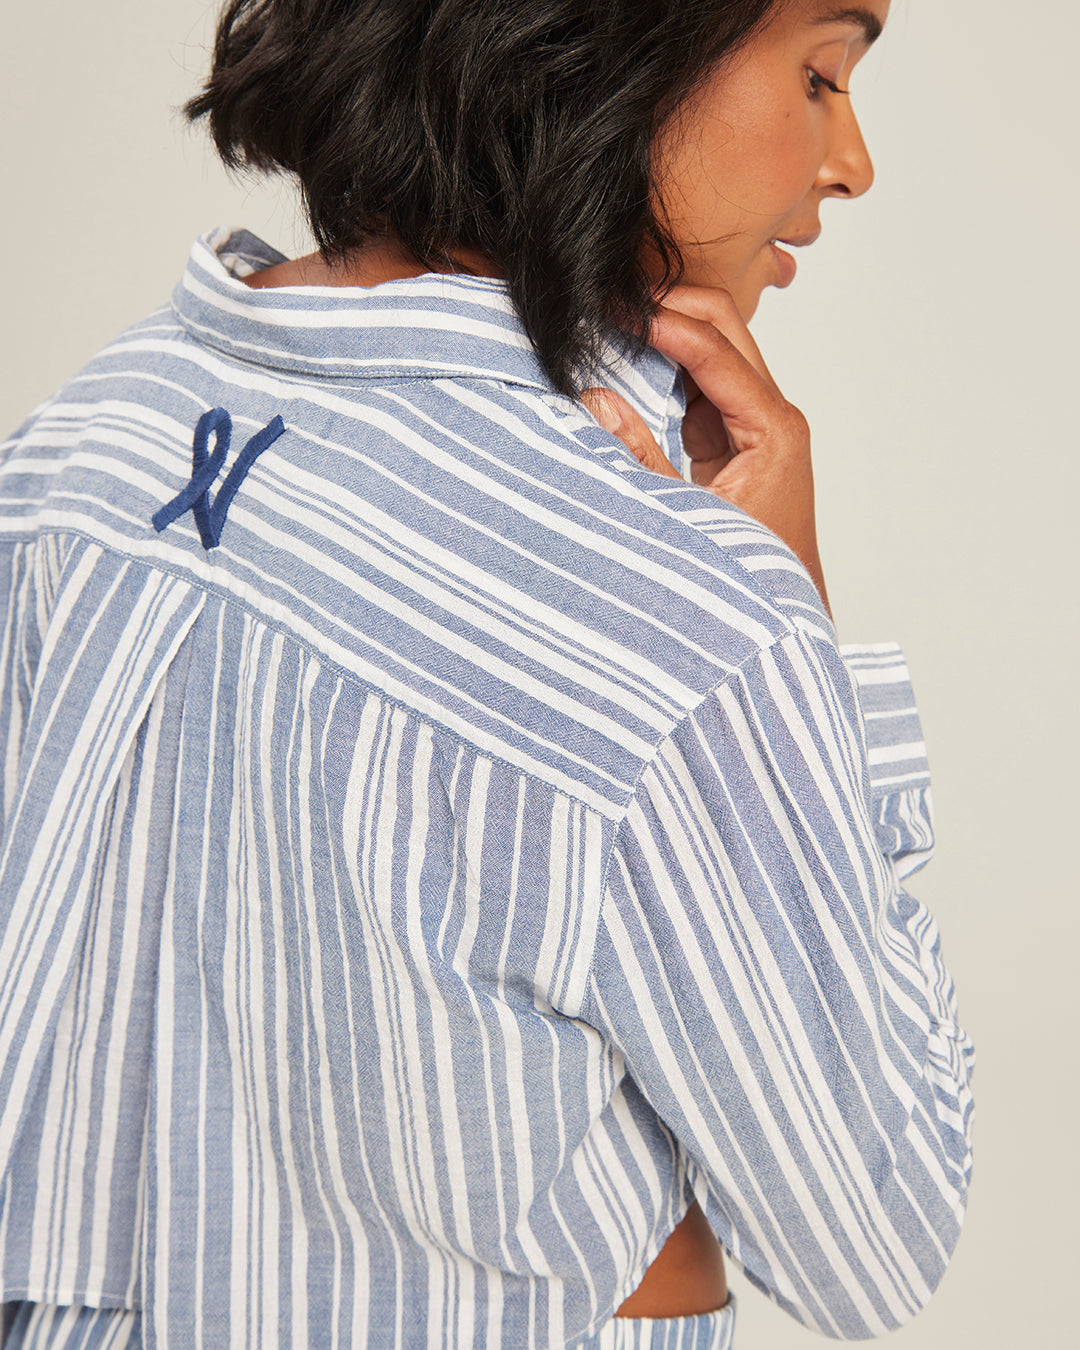 The Cropped Shirt - French Navy Stripe